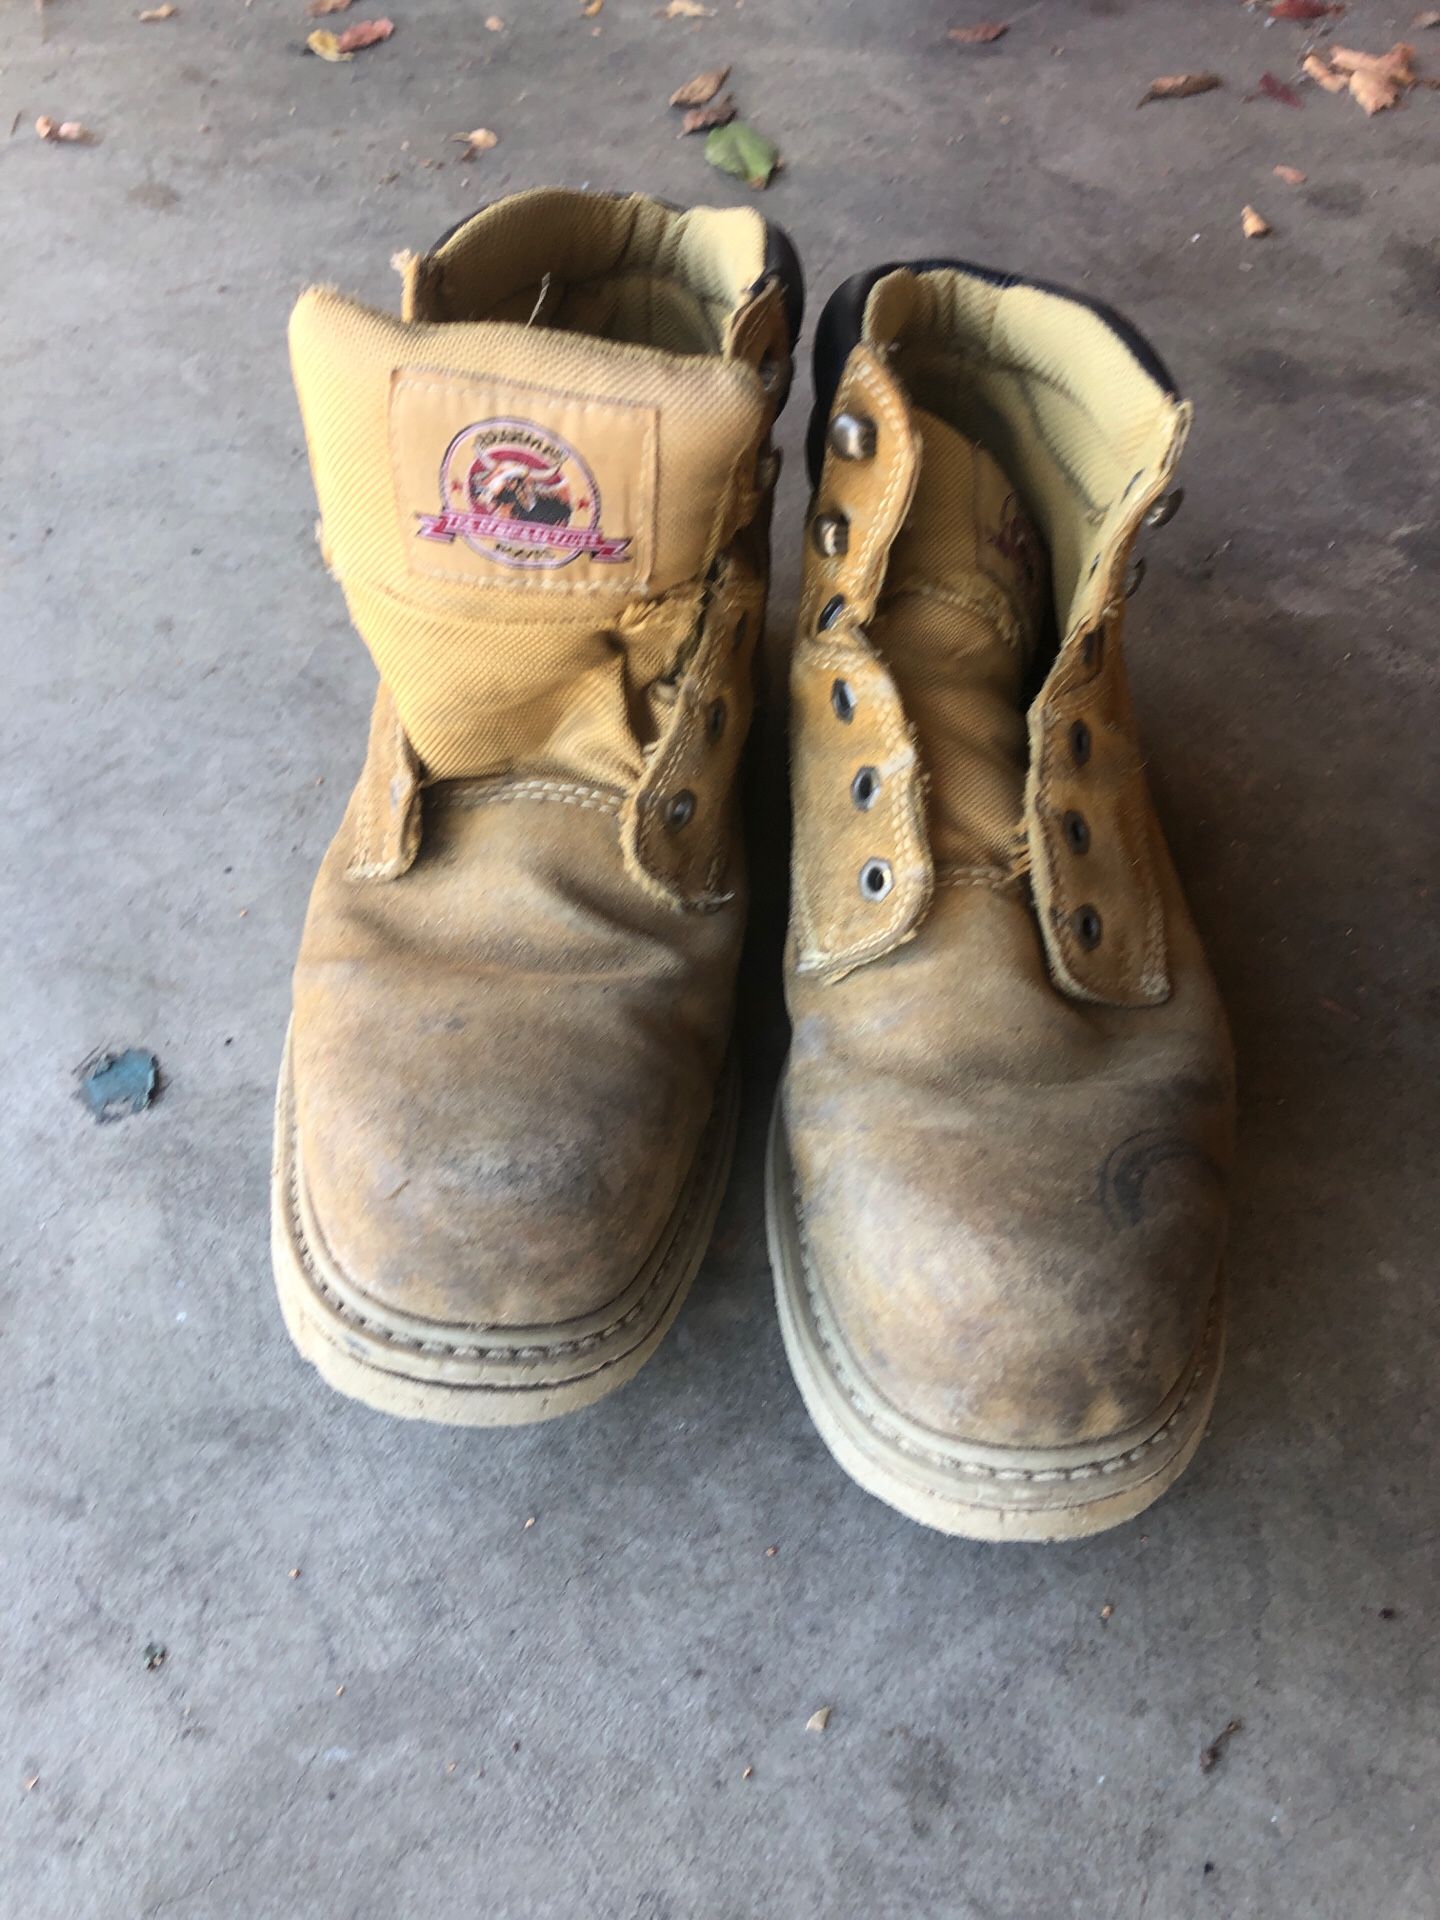 Used steal toed work boots